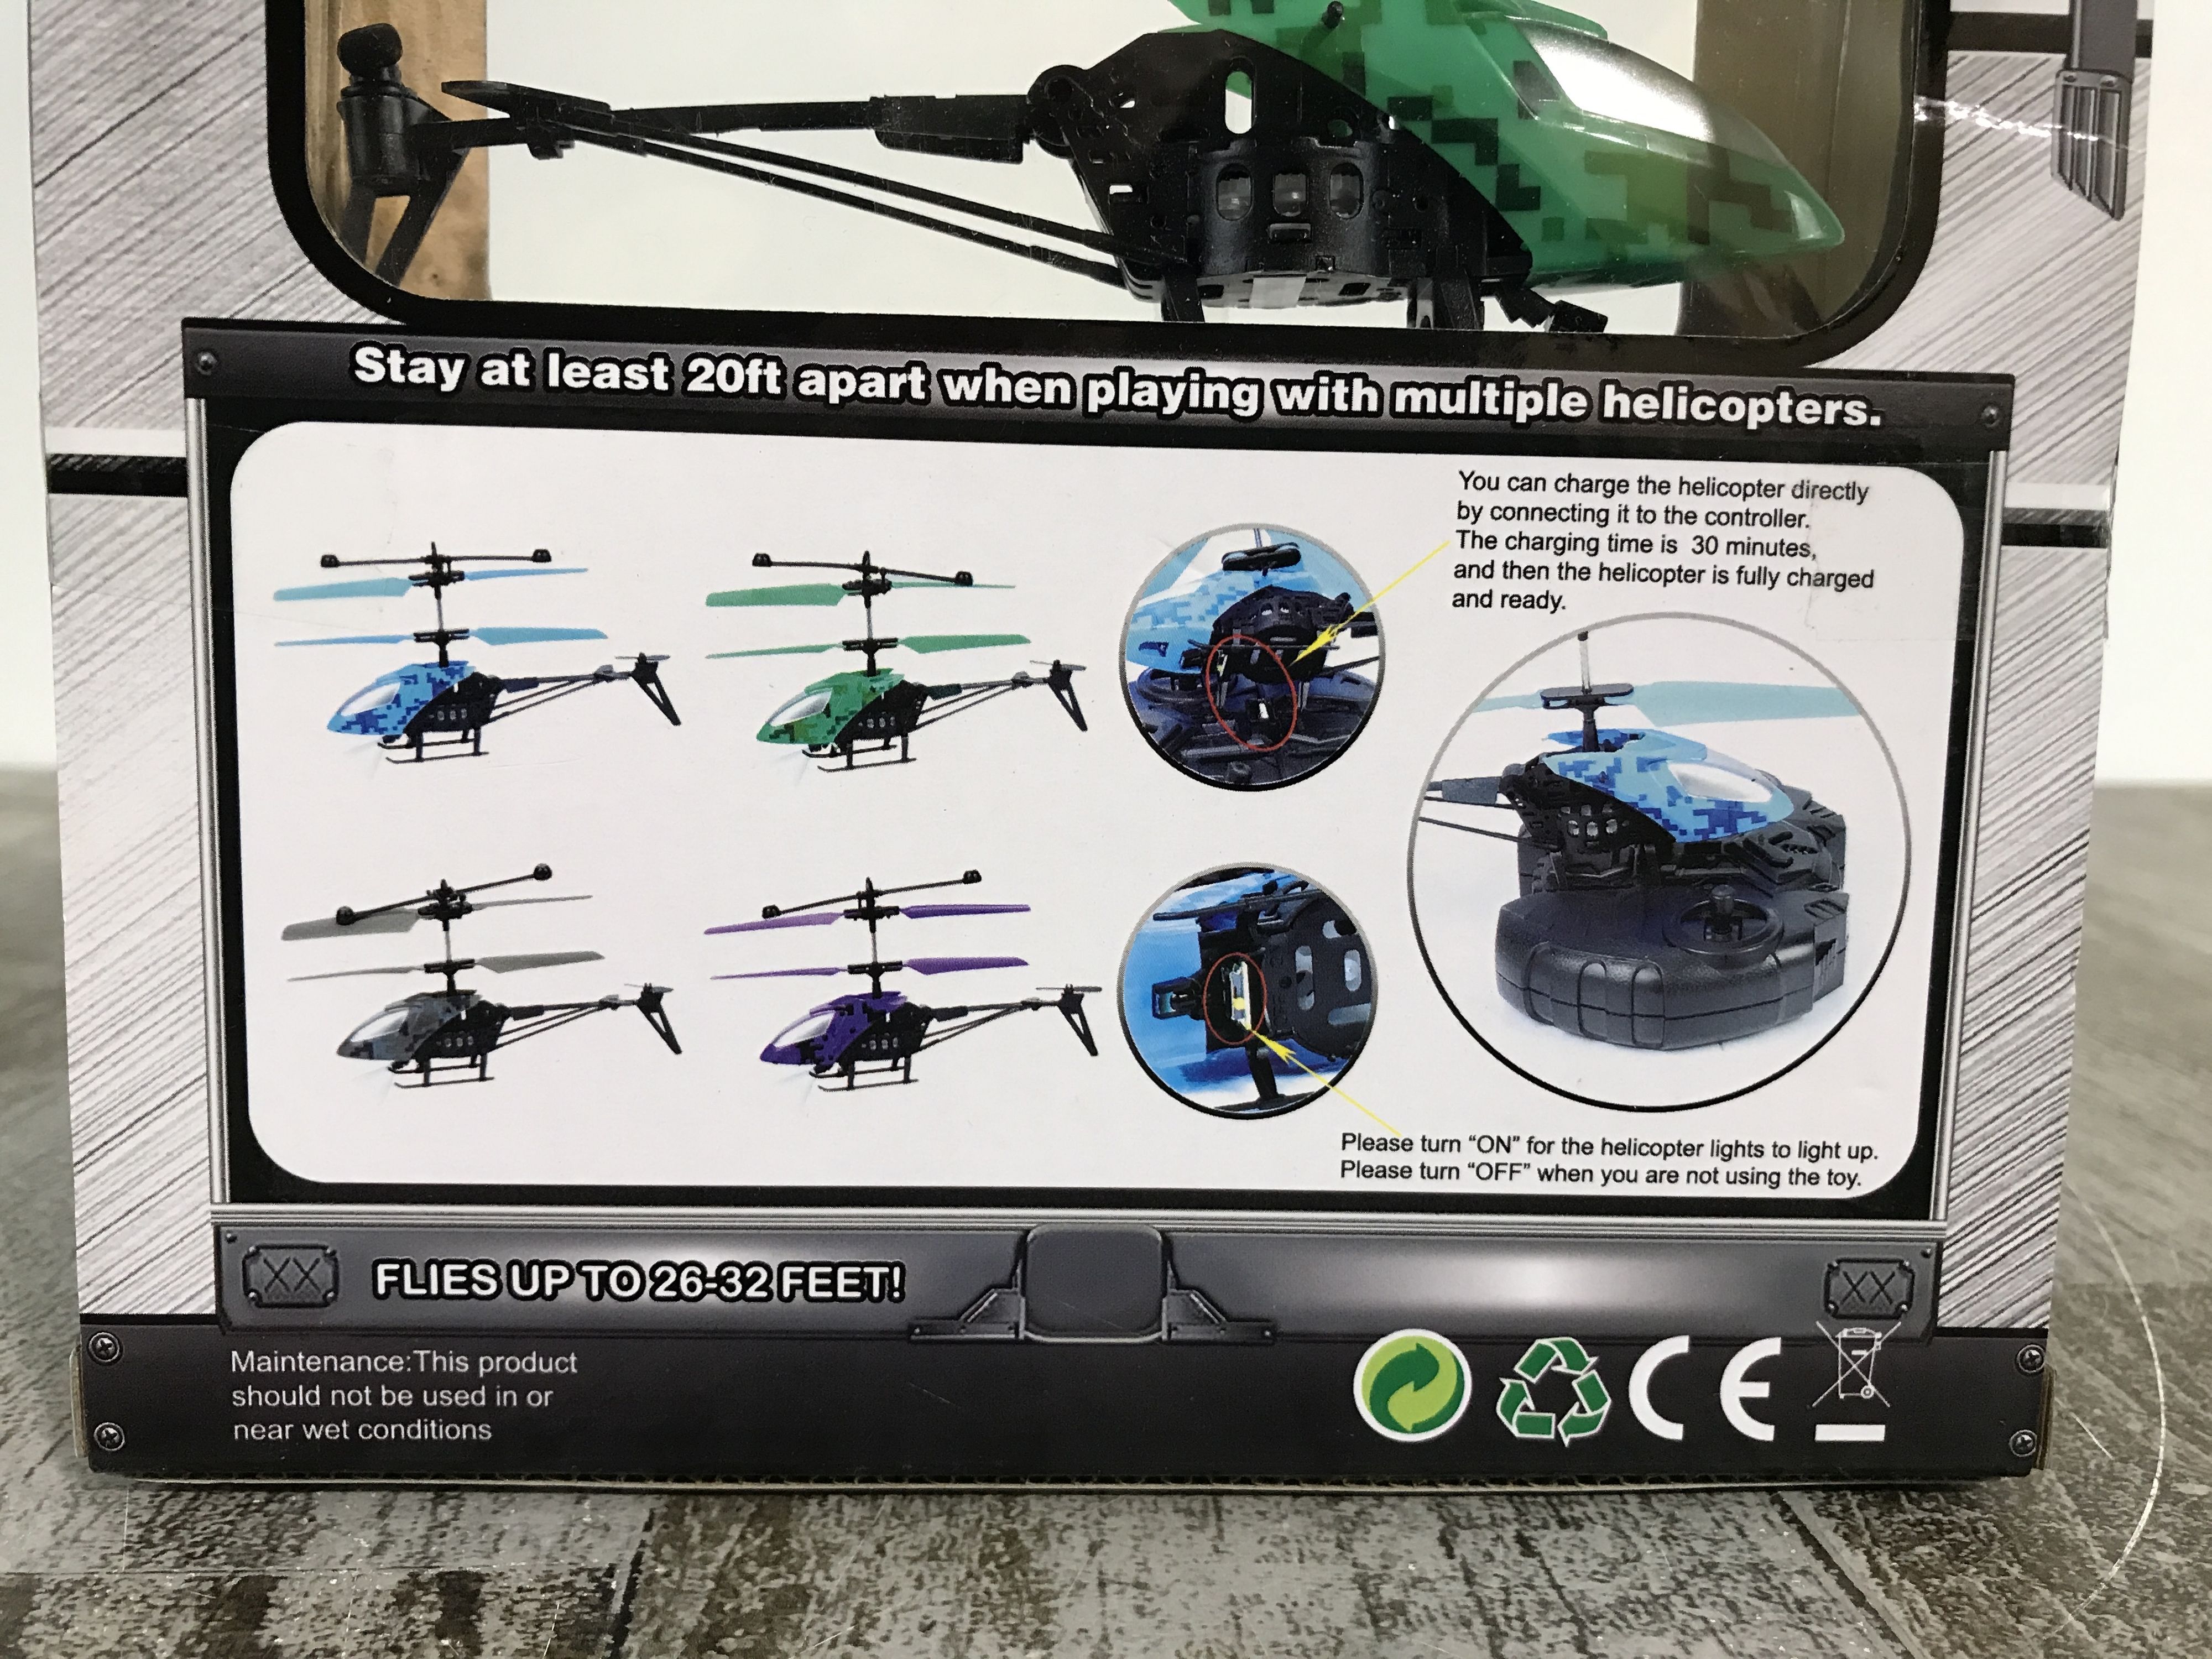 Air Victor 2ch Mini Infrared Remote Control Helicopter New In Box